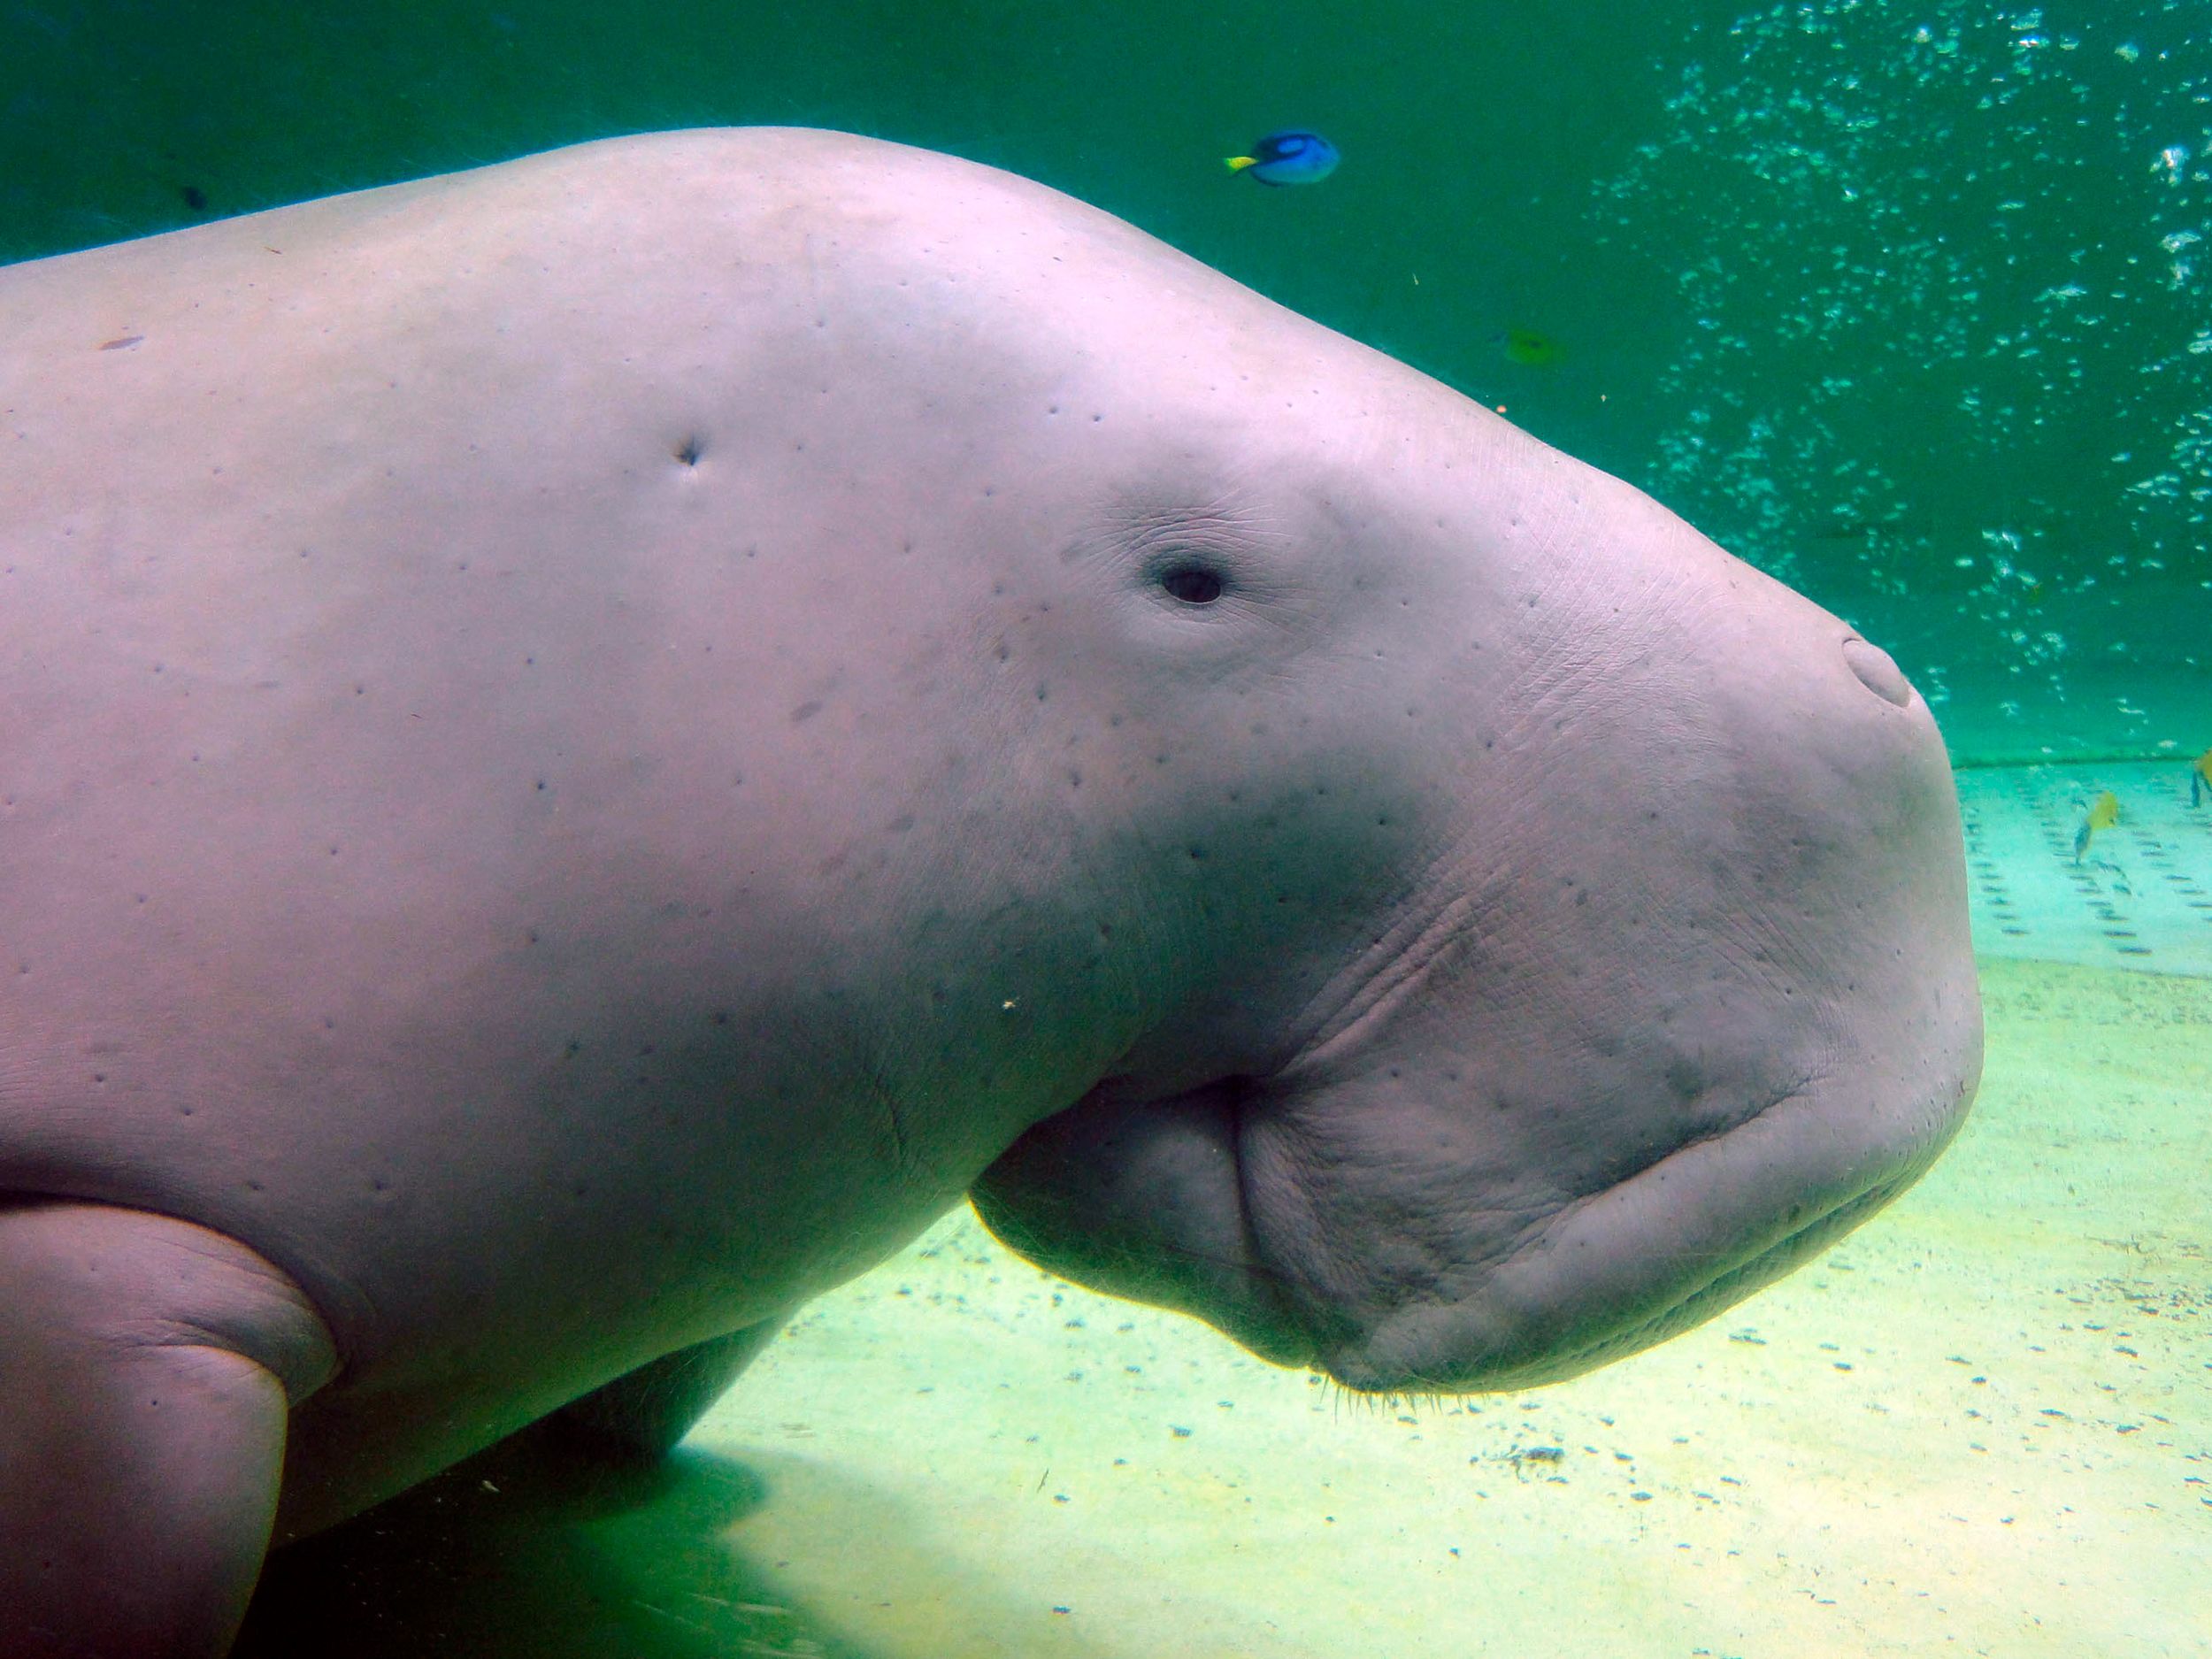 Abalone and sea cows threatened with extinction, warns IUCN Red List | CNN